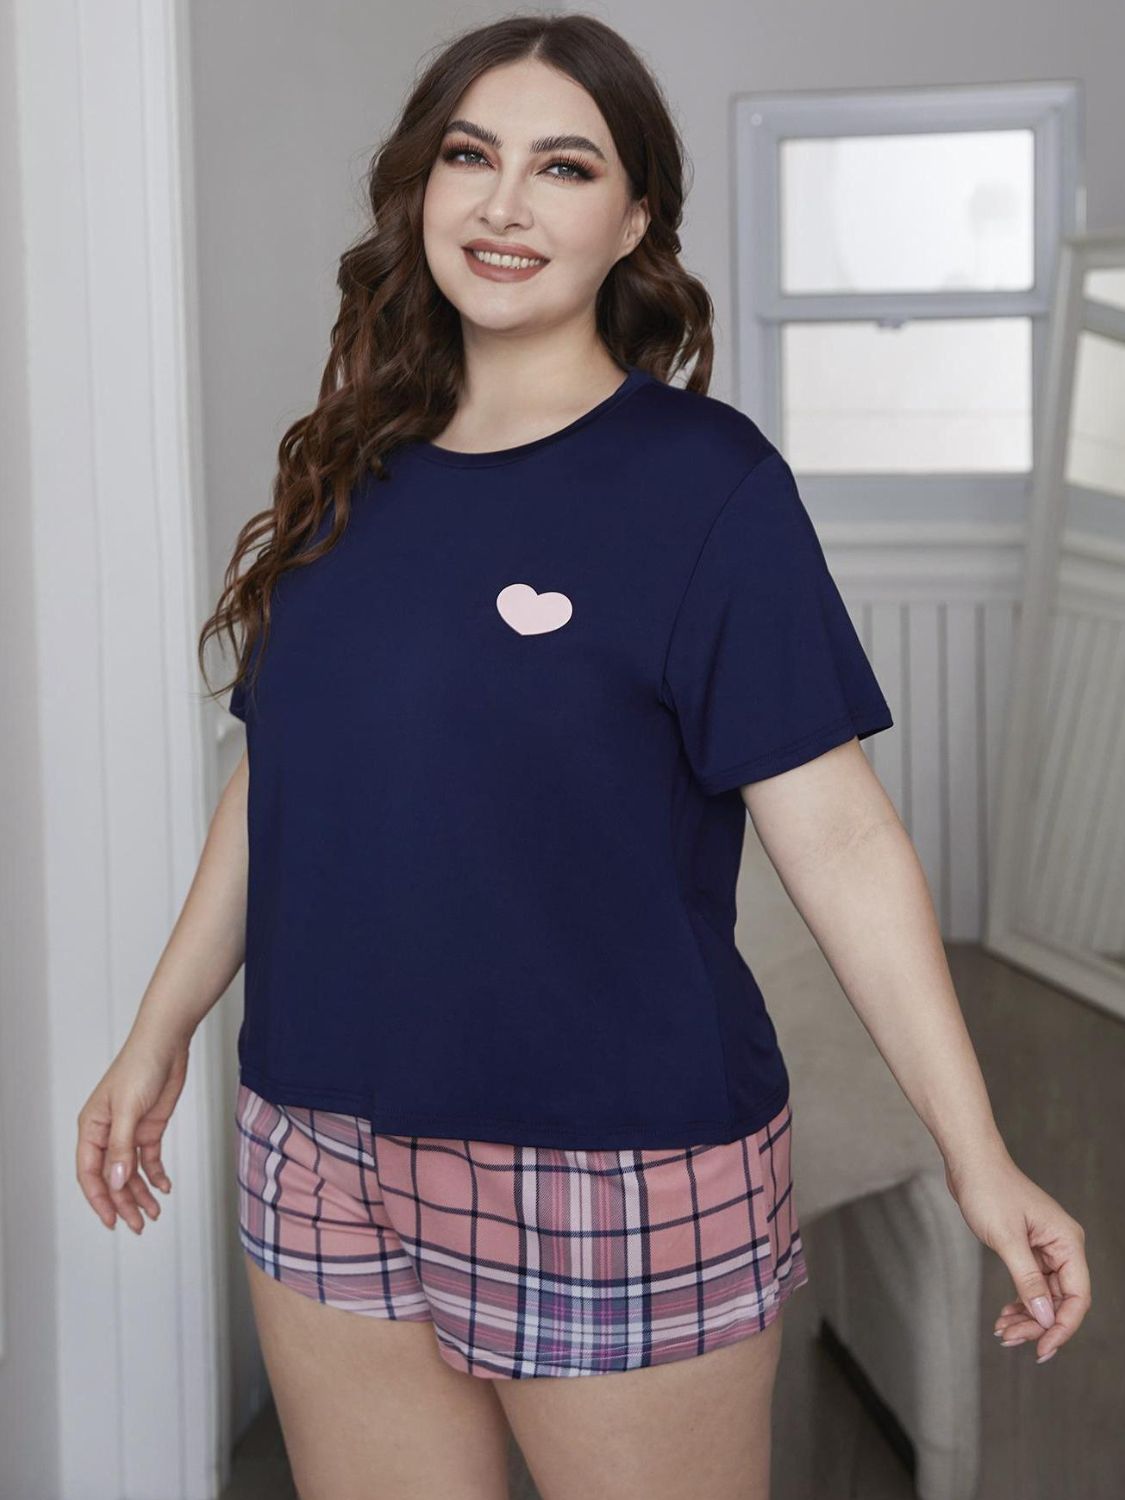 Heart Graphic Top and Plaid Shorts Loungewear Set